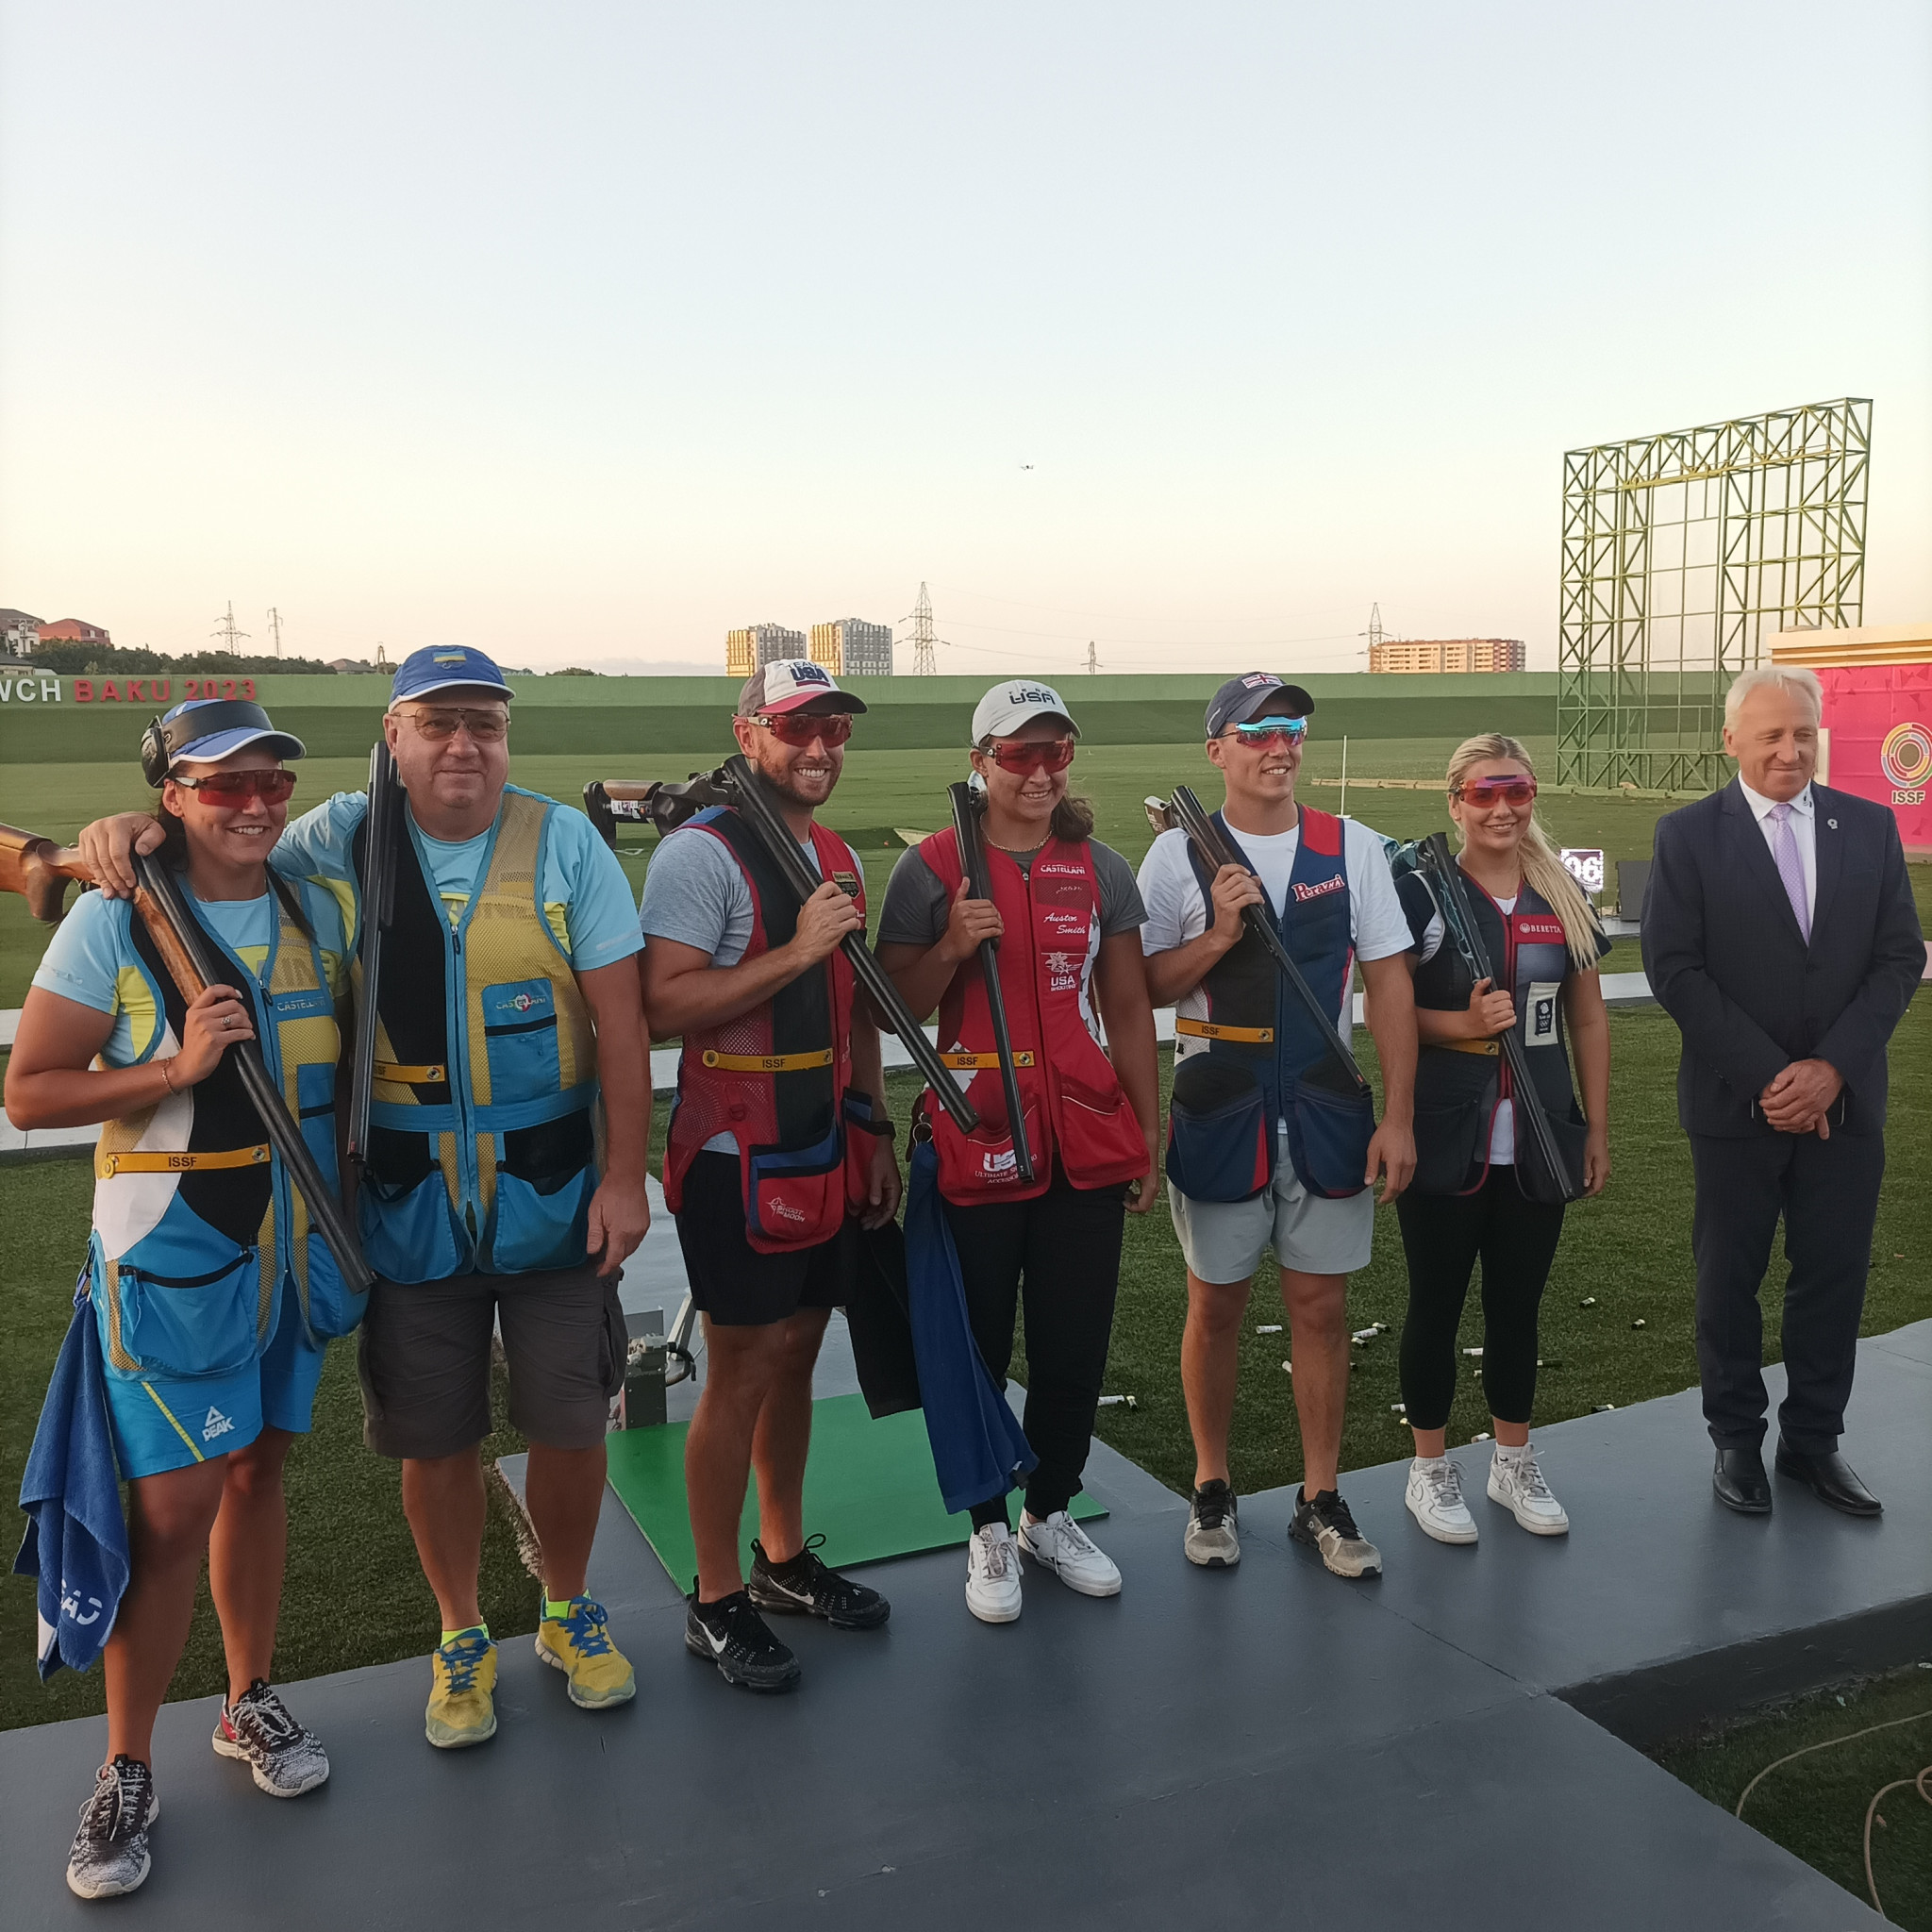 Hancock and Smith win mixed skeet title for United States at ISSF World Championships